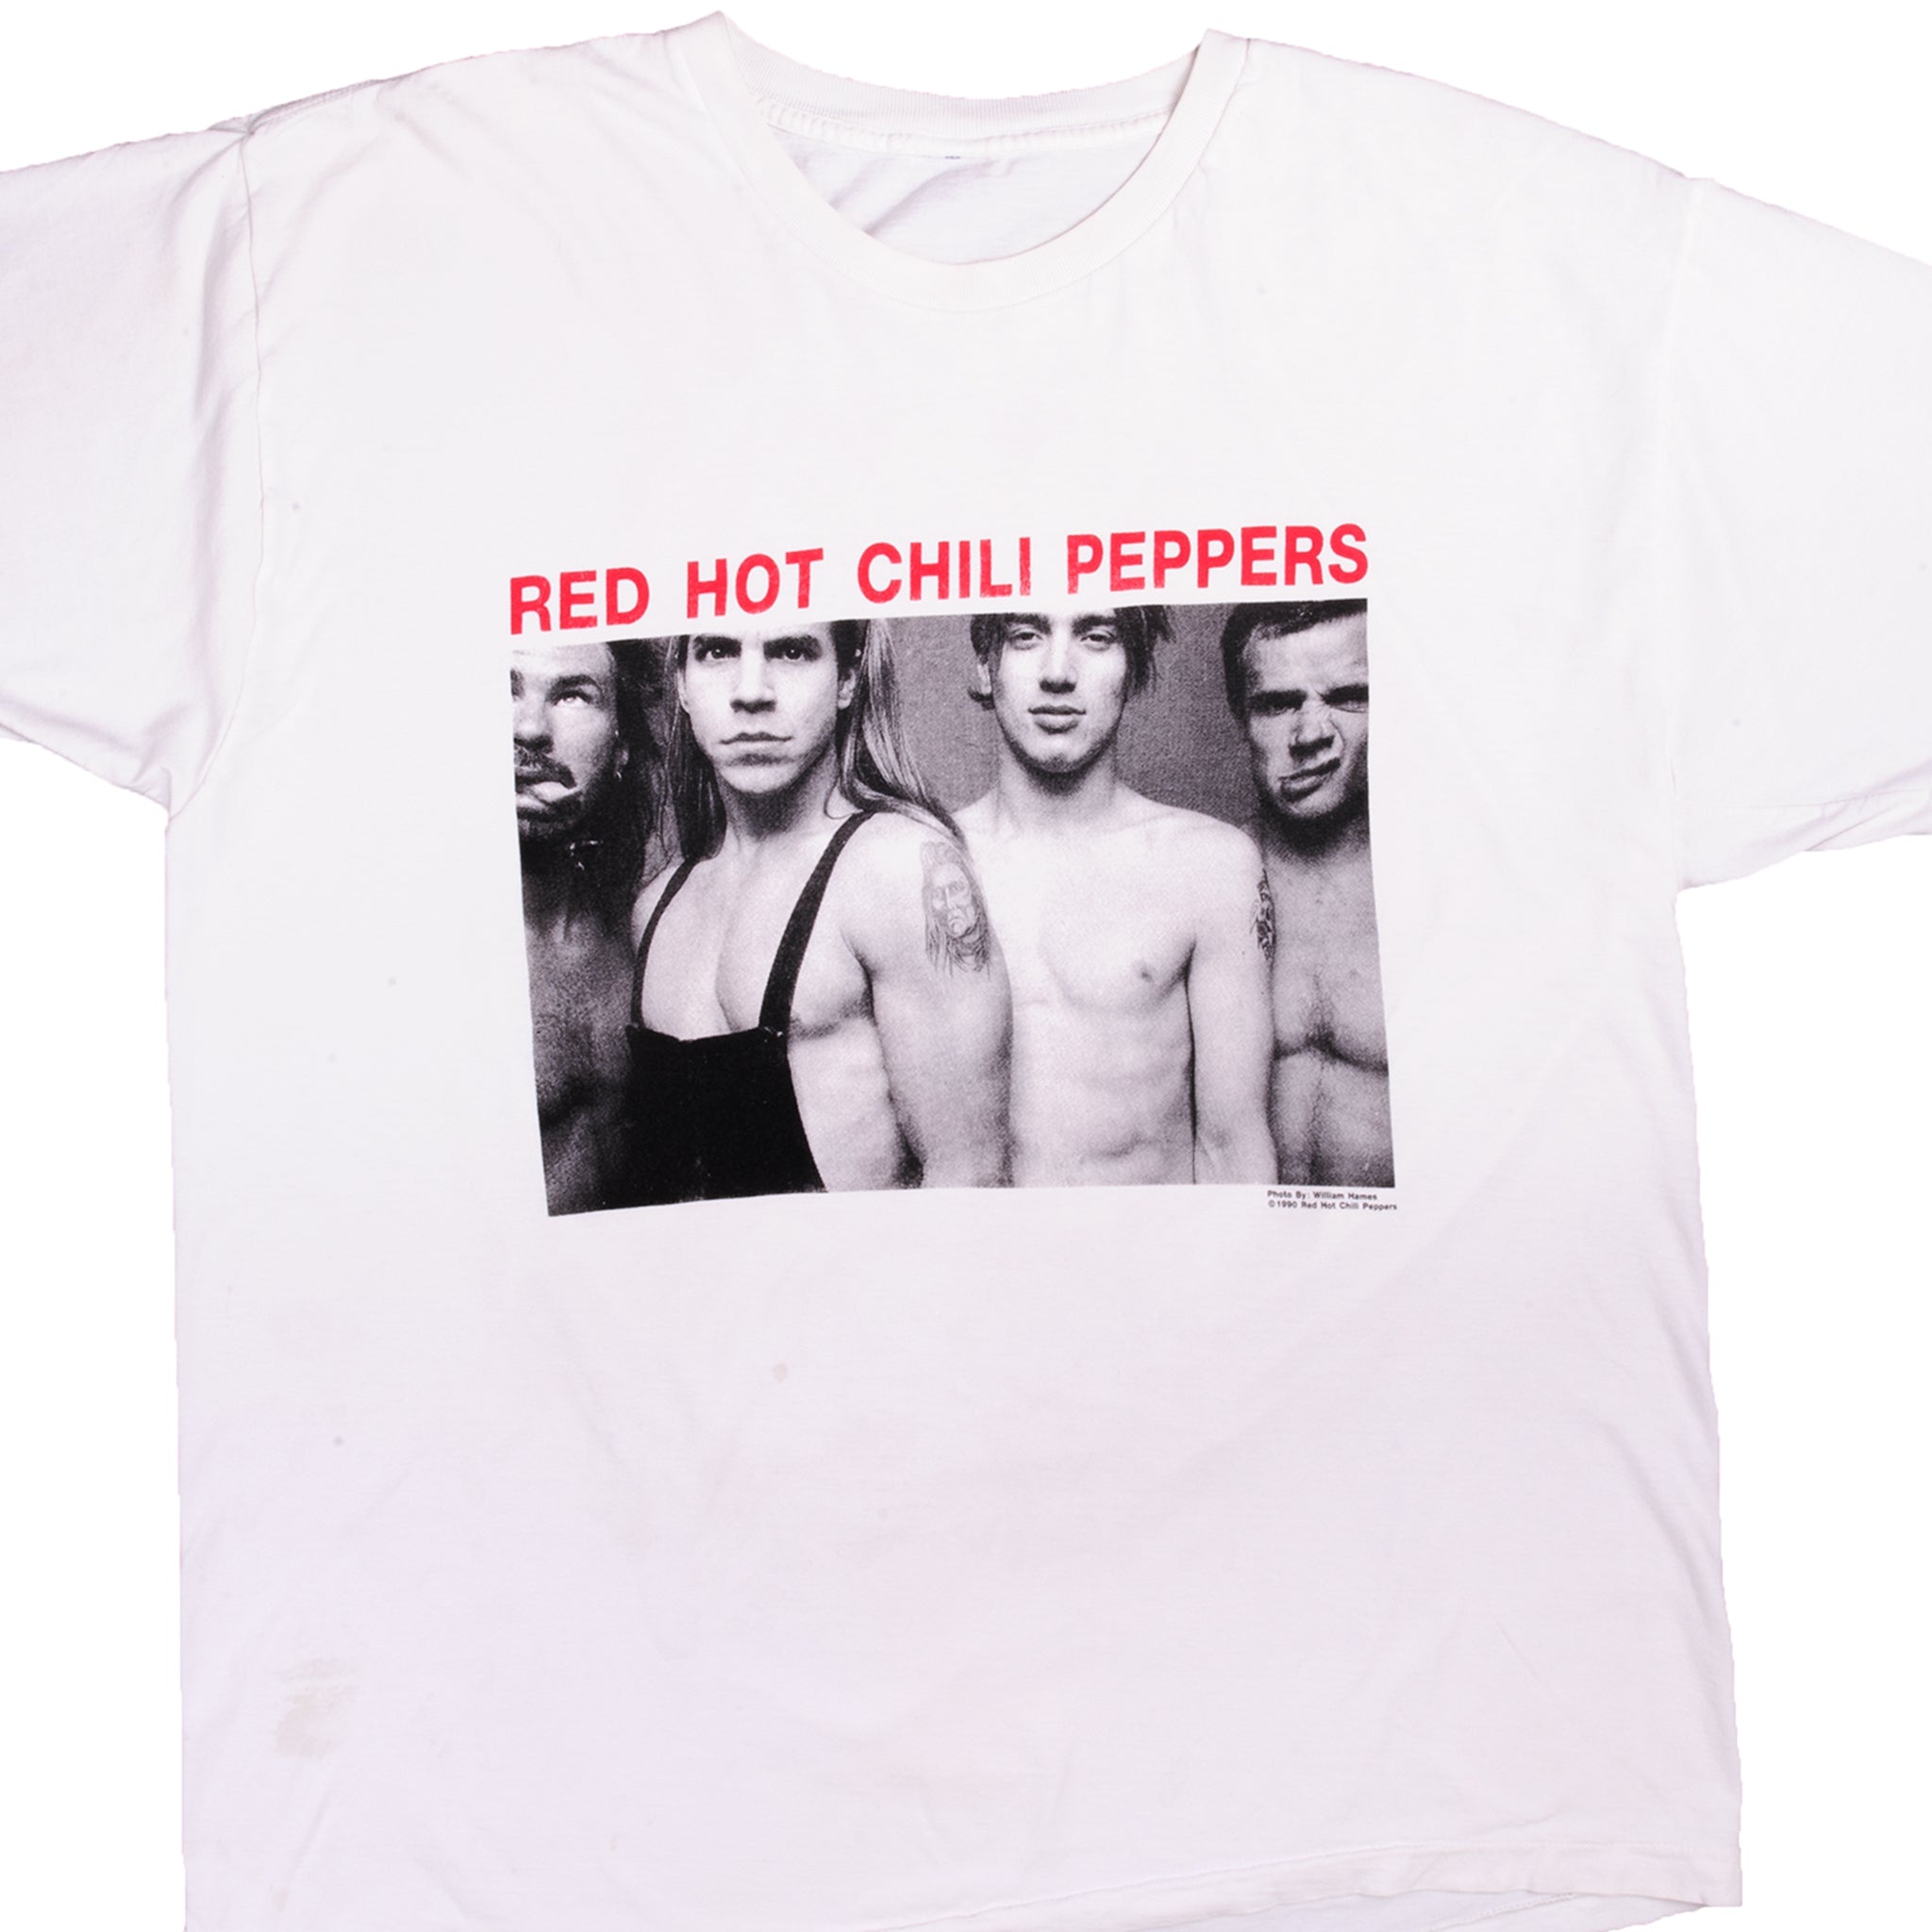 Red Hot Chili Peppers Vintage 90s T Shirt